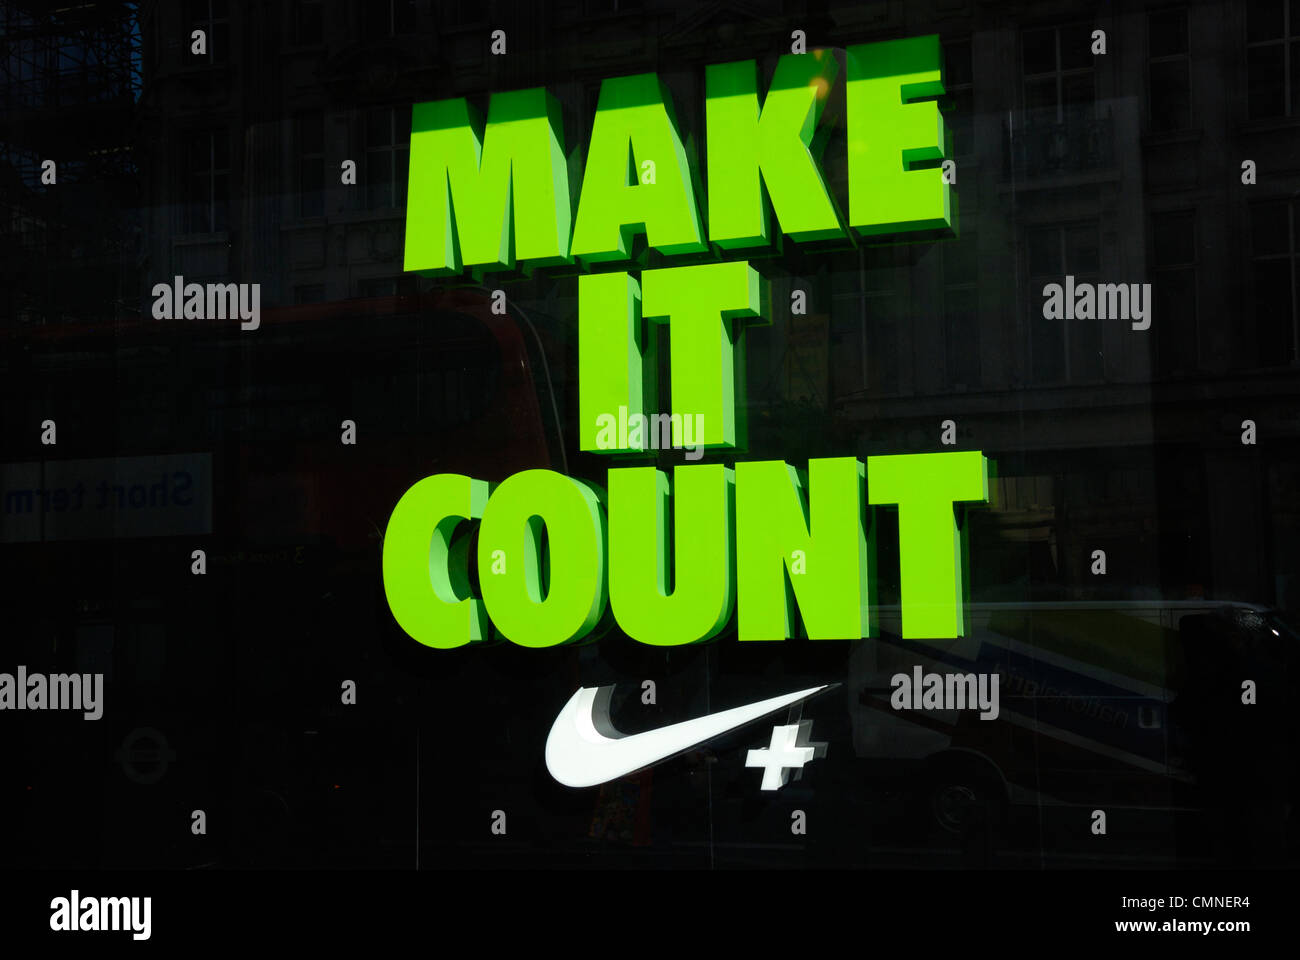 Nike Slogan High Resolution Stock Photography and Images - Alamy